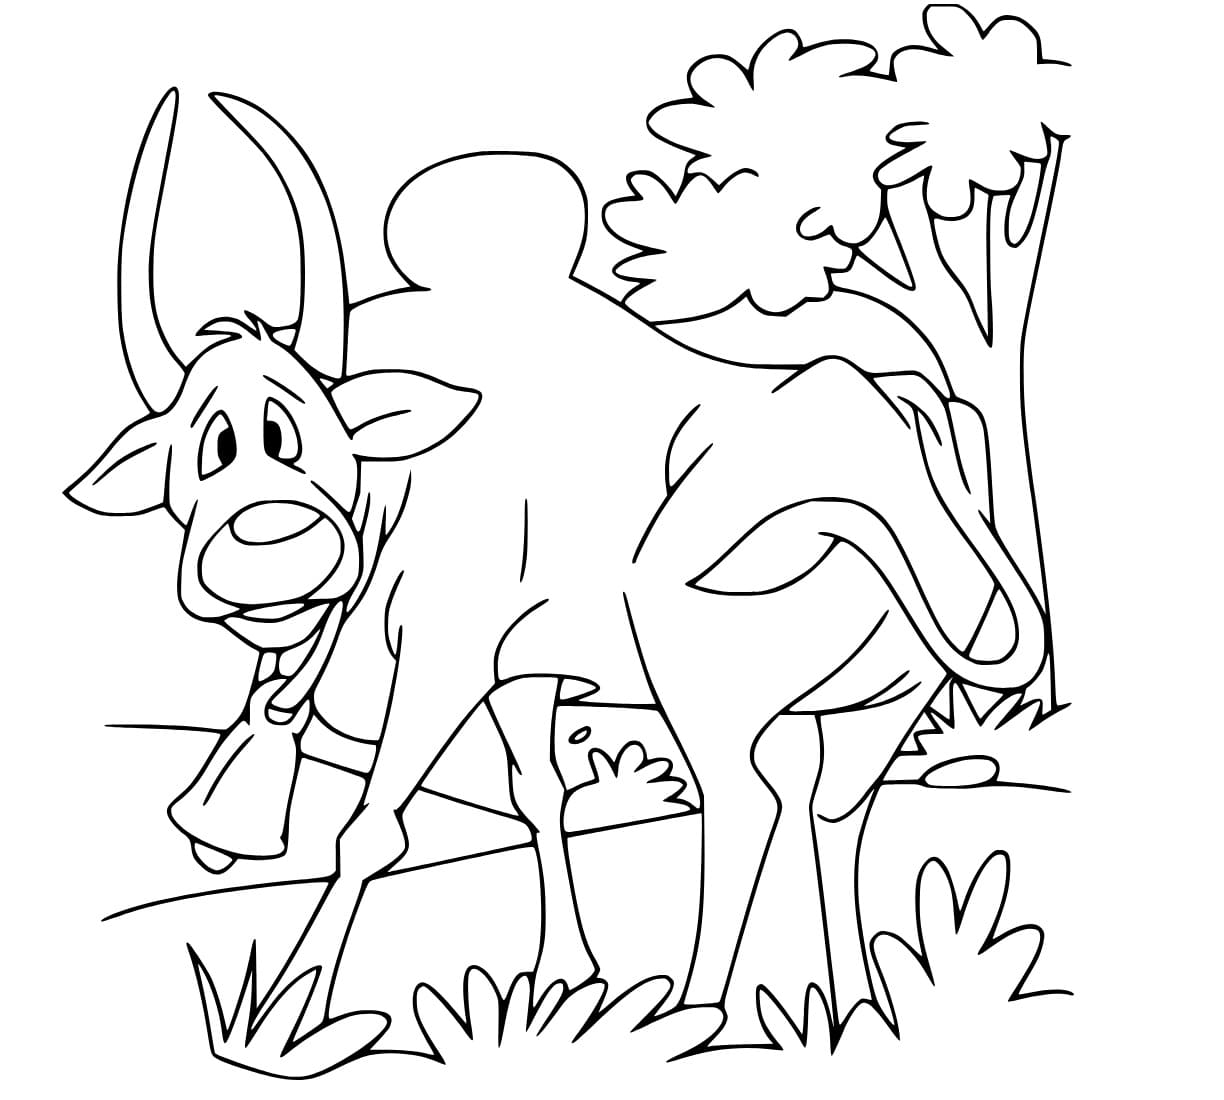 Confused Ox coloring page - Download, Print or Color Online for Free